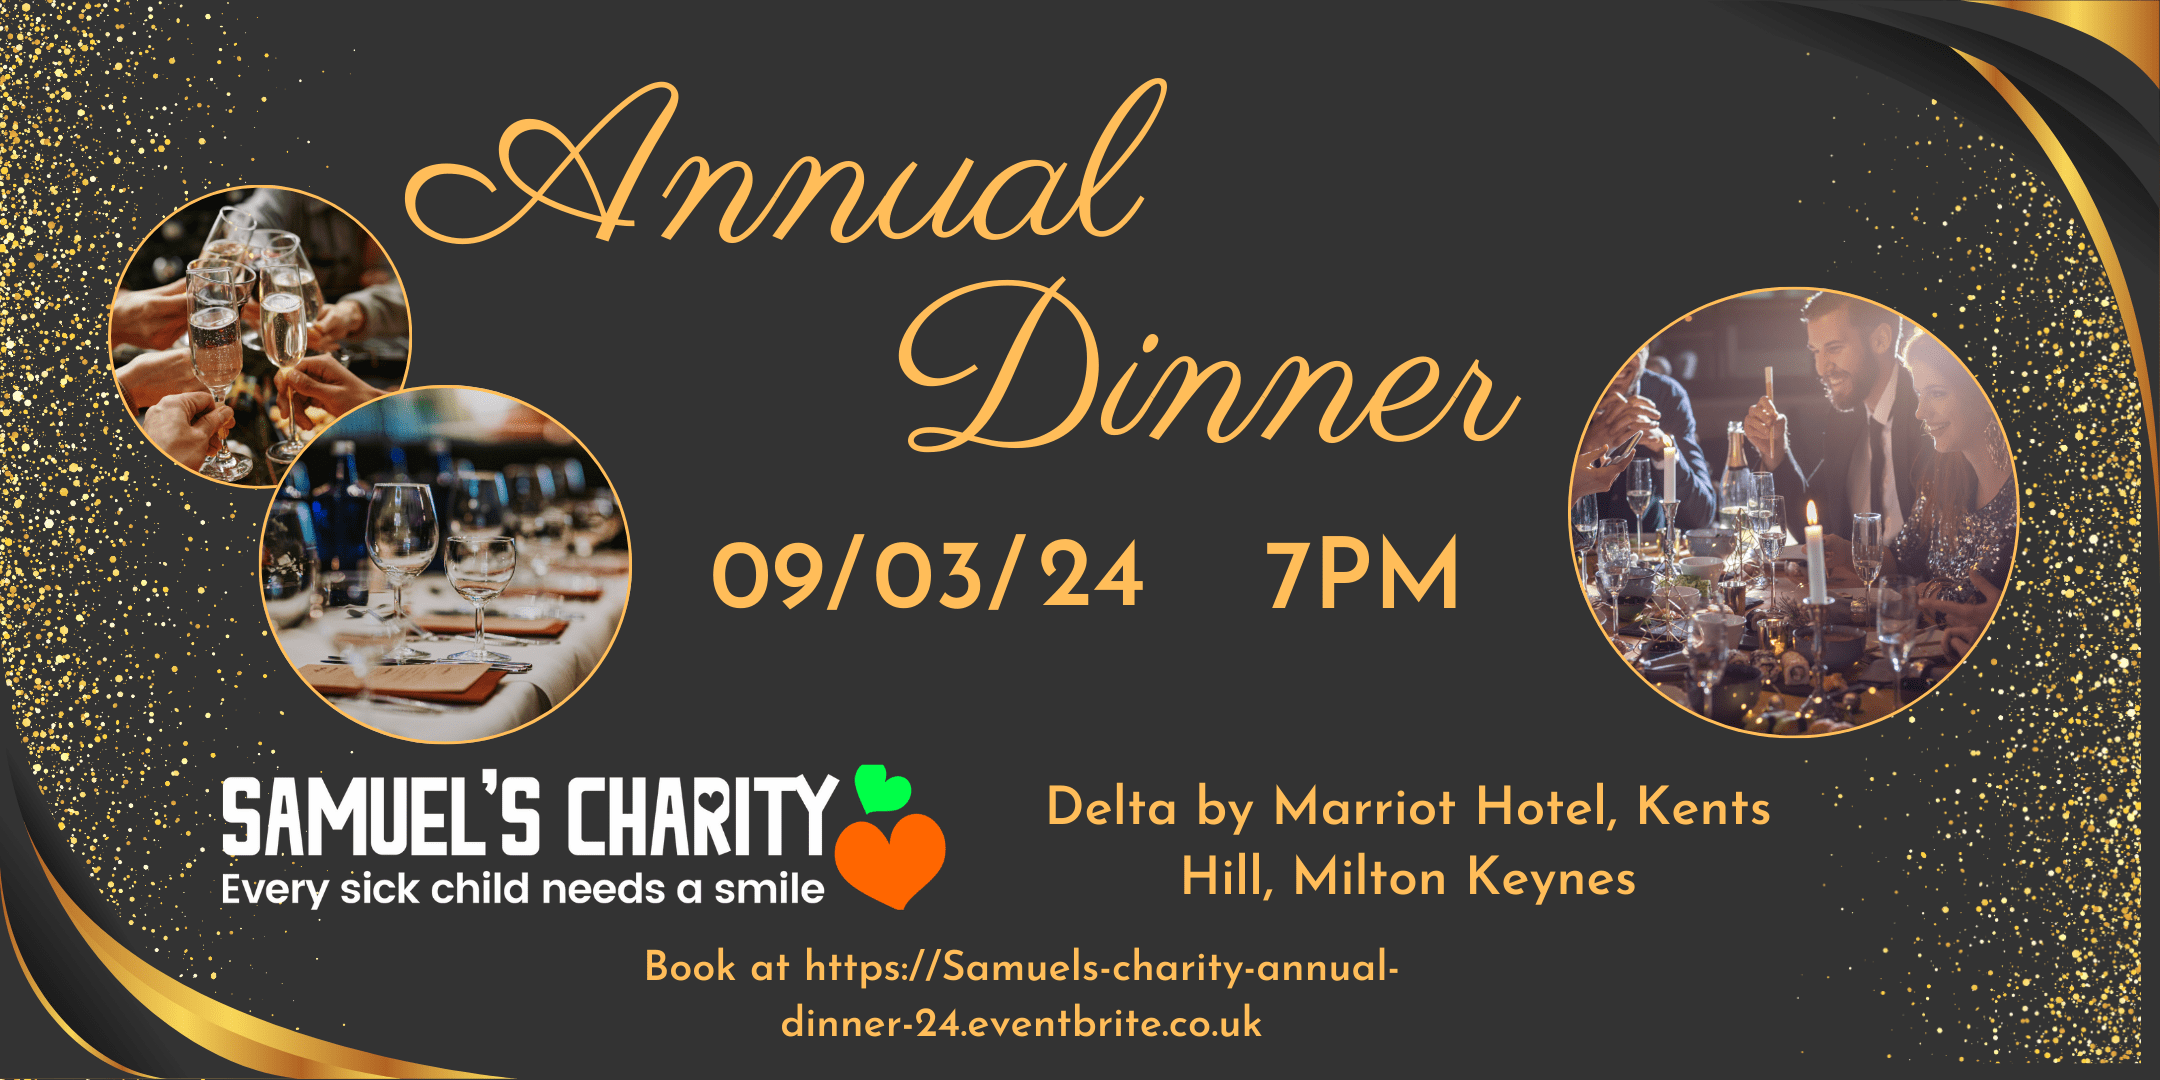 Annual Charity Dinner – Samuel’s Charity | Northamptonshire Chamber of Commerce